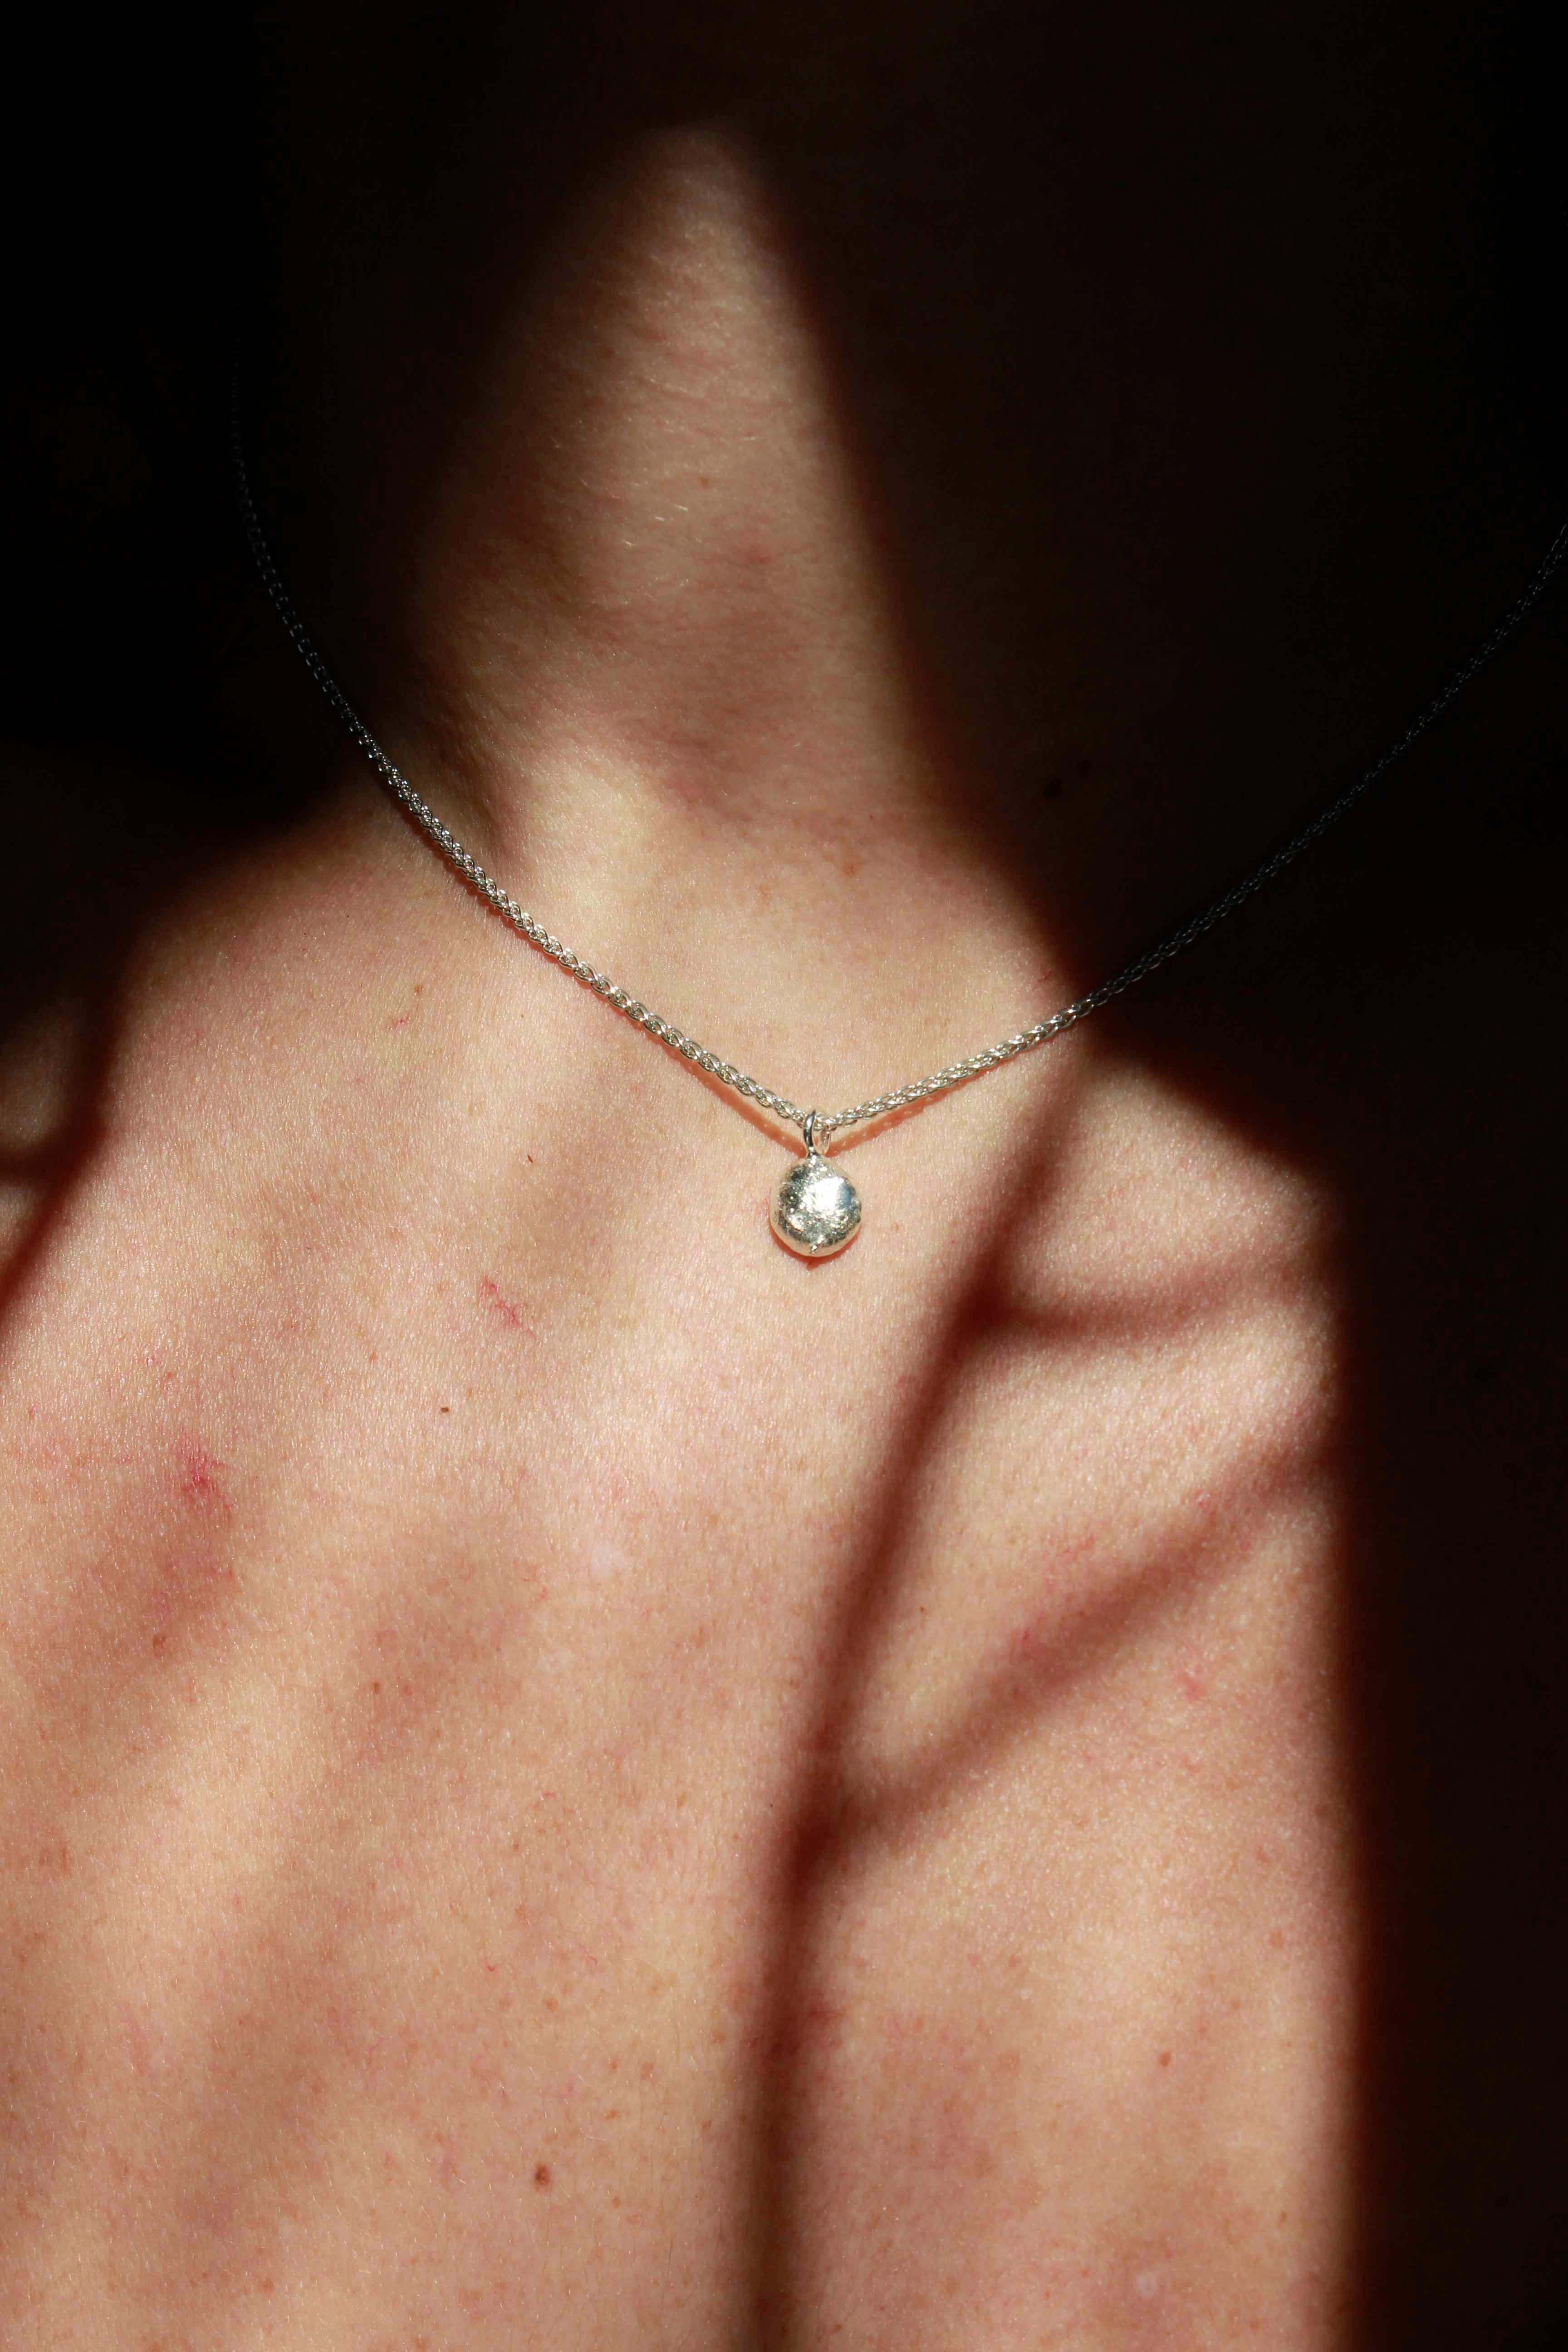 Leto Necklace features a silver ball.

The necklace has 39cm length.

The small organic ball is made from our silver scrap, which means it is 100% recycled and solid.

The ball has approximately 0.8cm width and 0.5cm length.

Please note that this